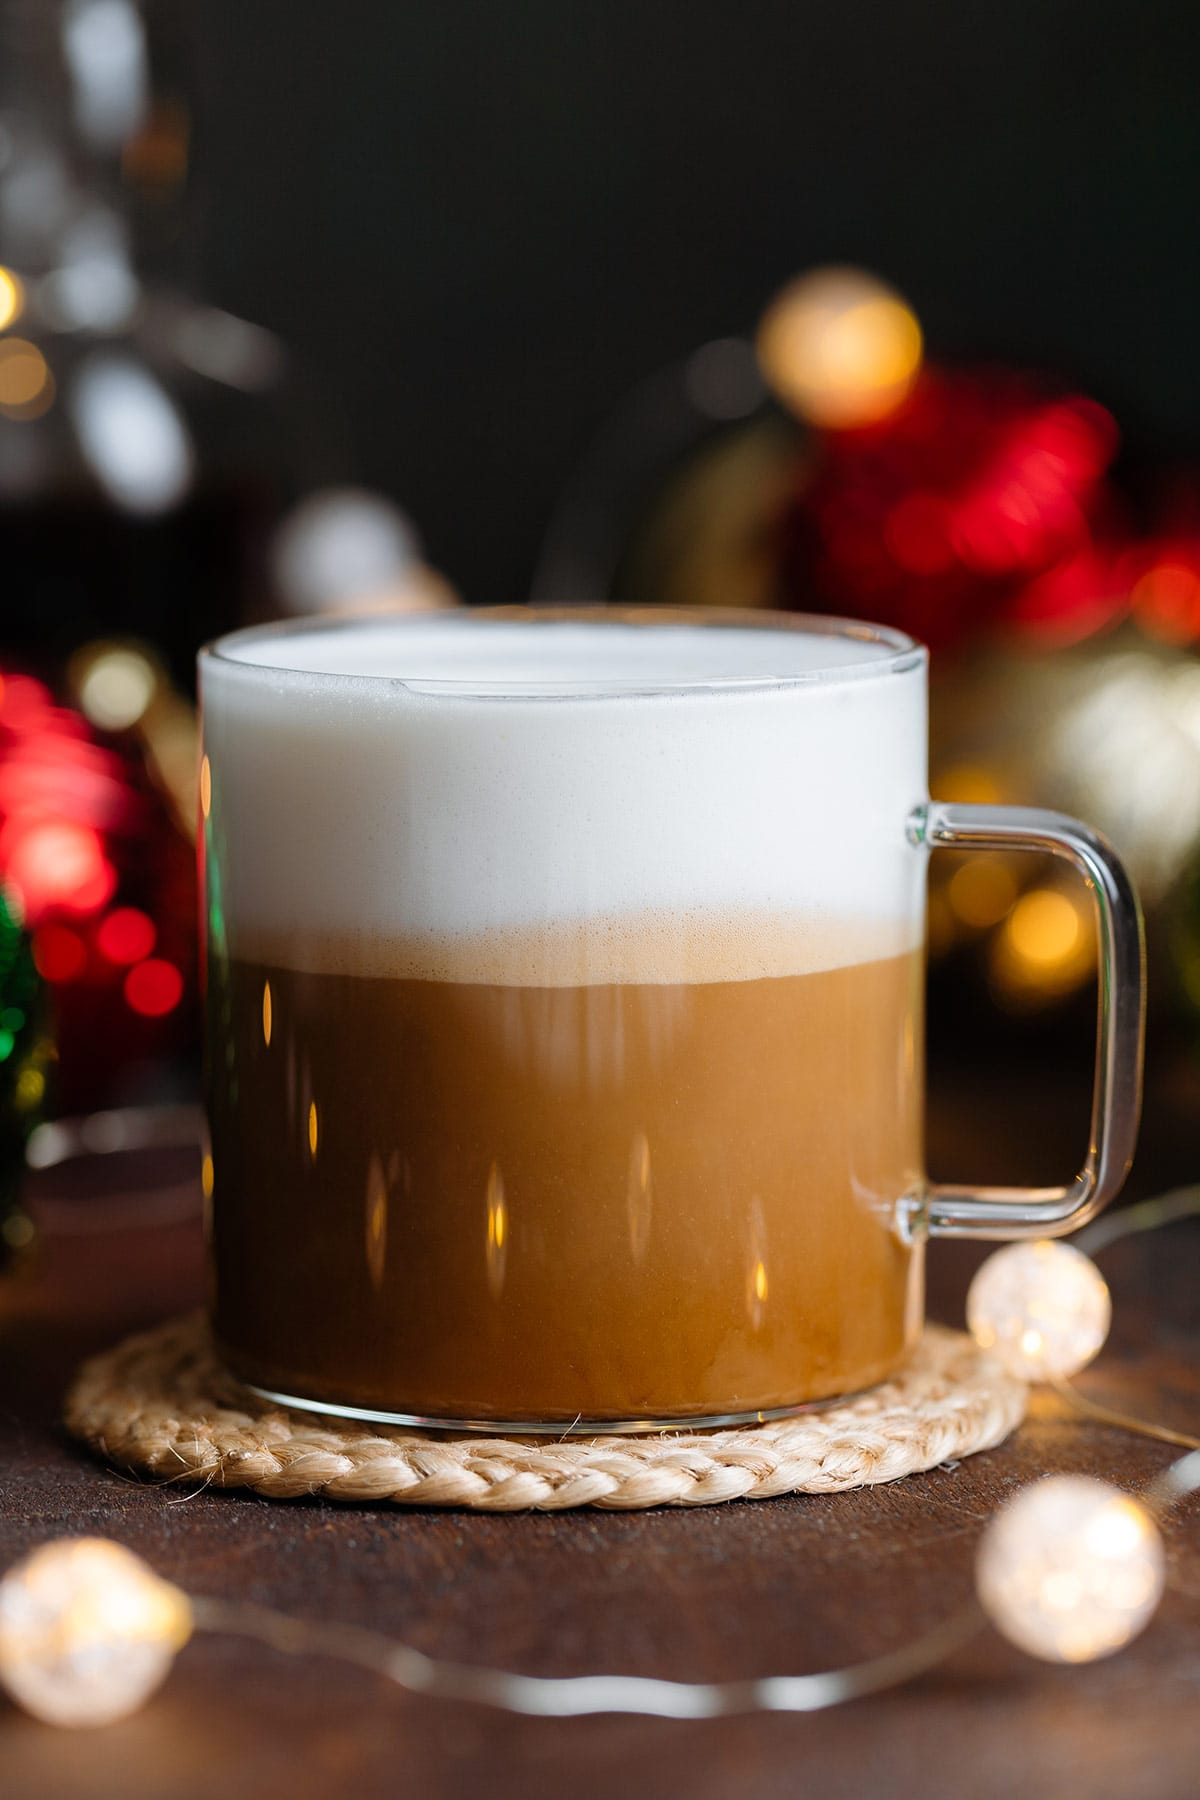 A chestnut praline latte in a glass mug on a dark wooden background with Christmas ornaments behind it.